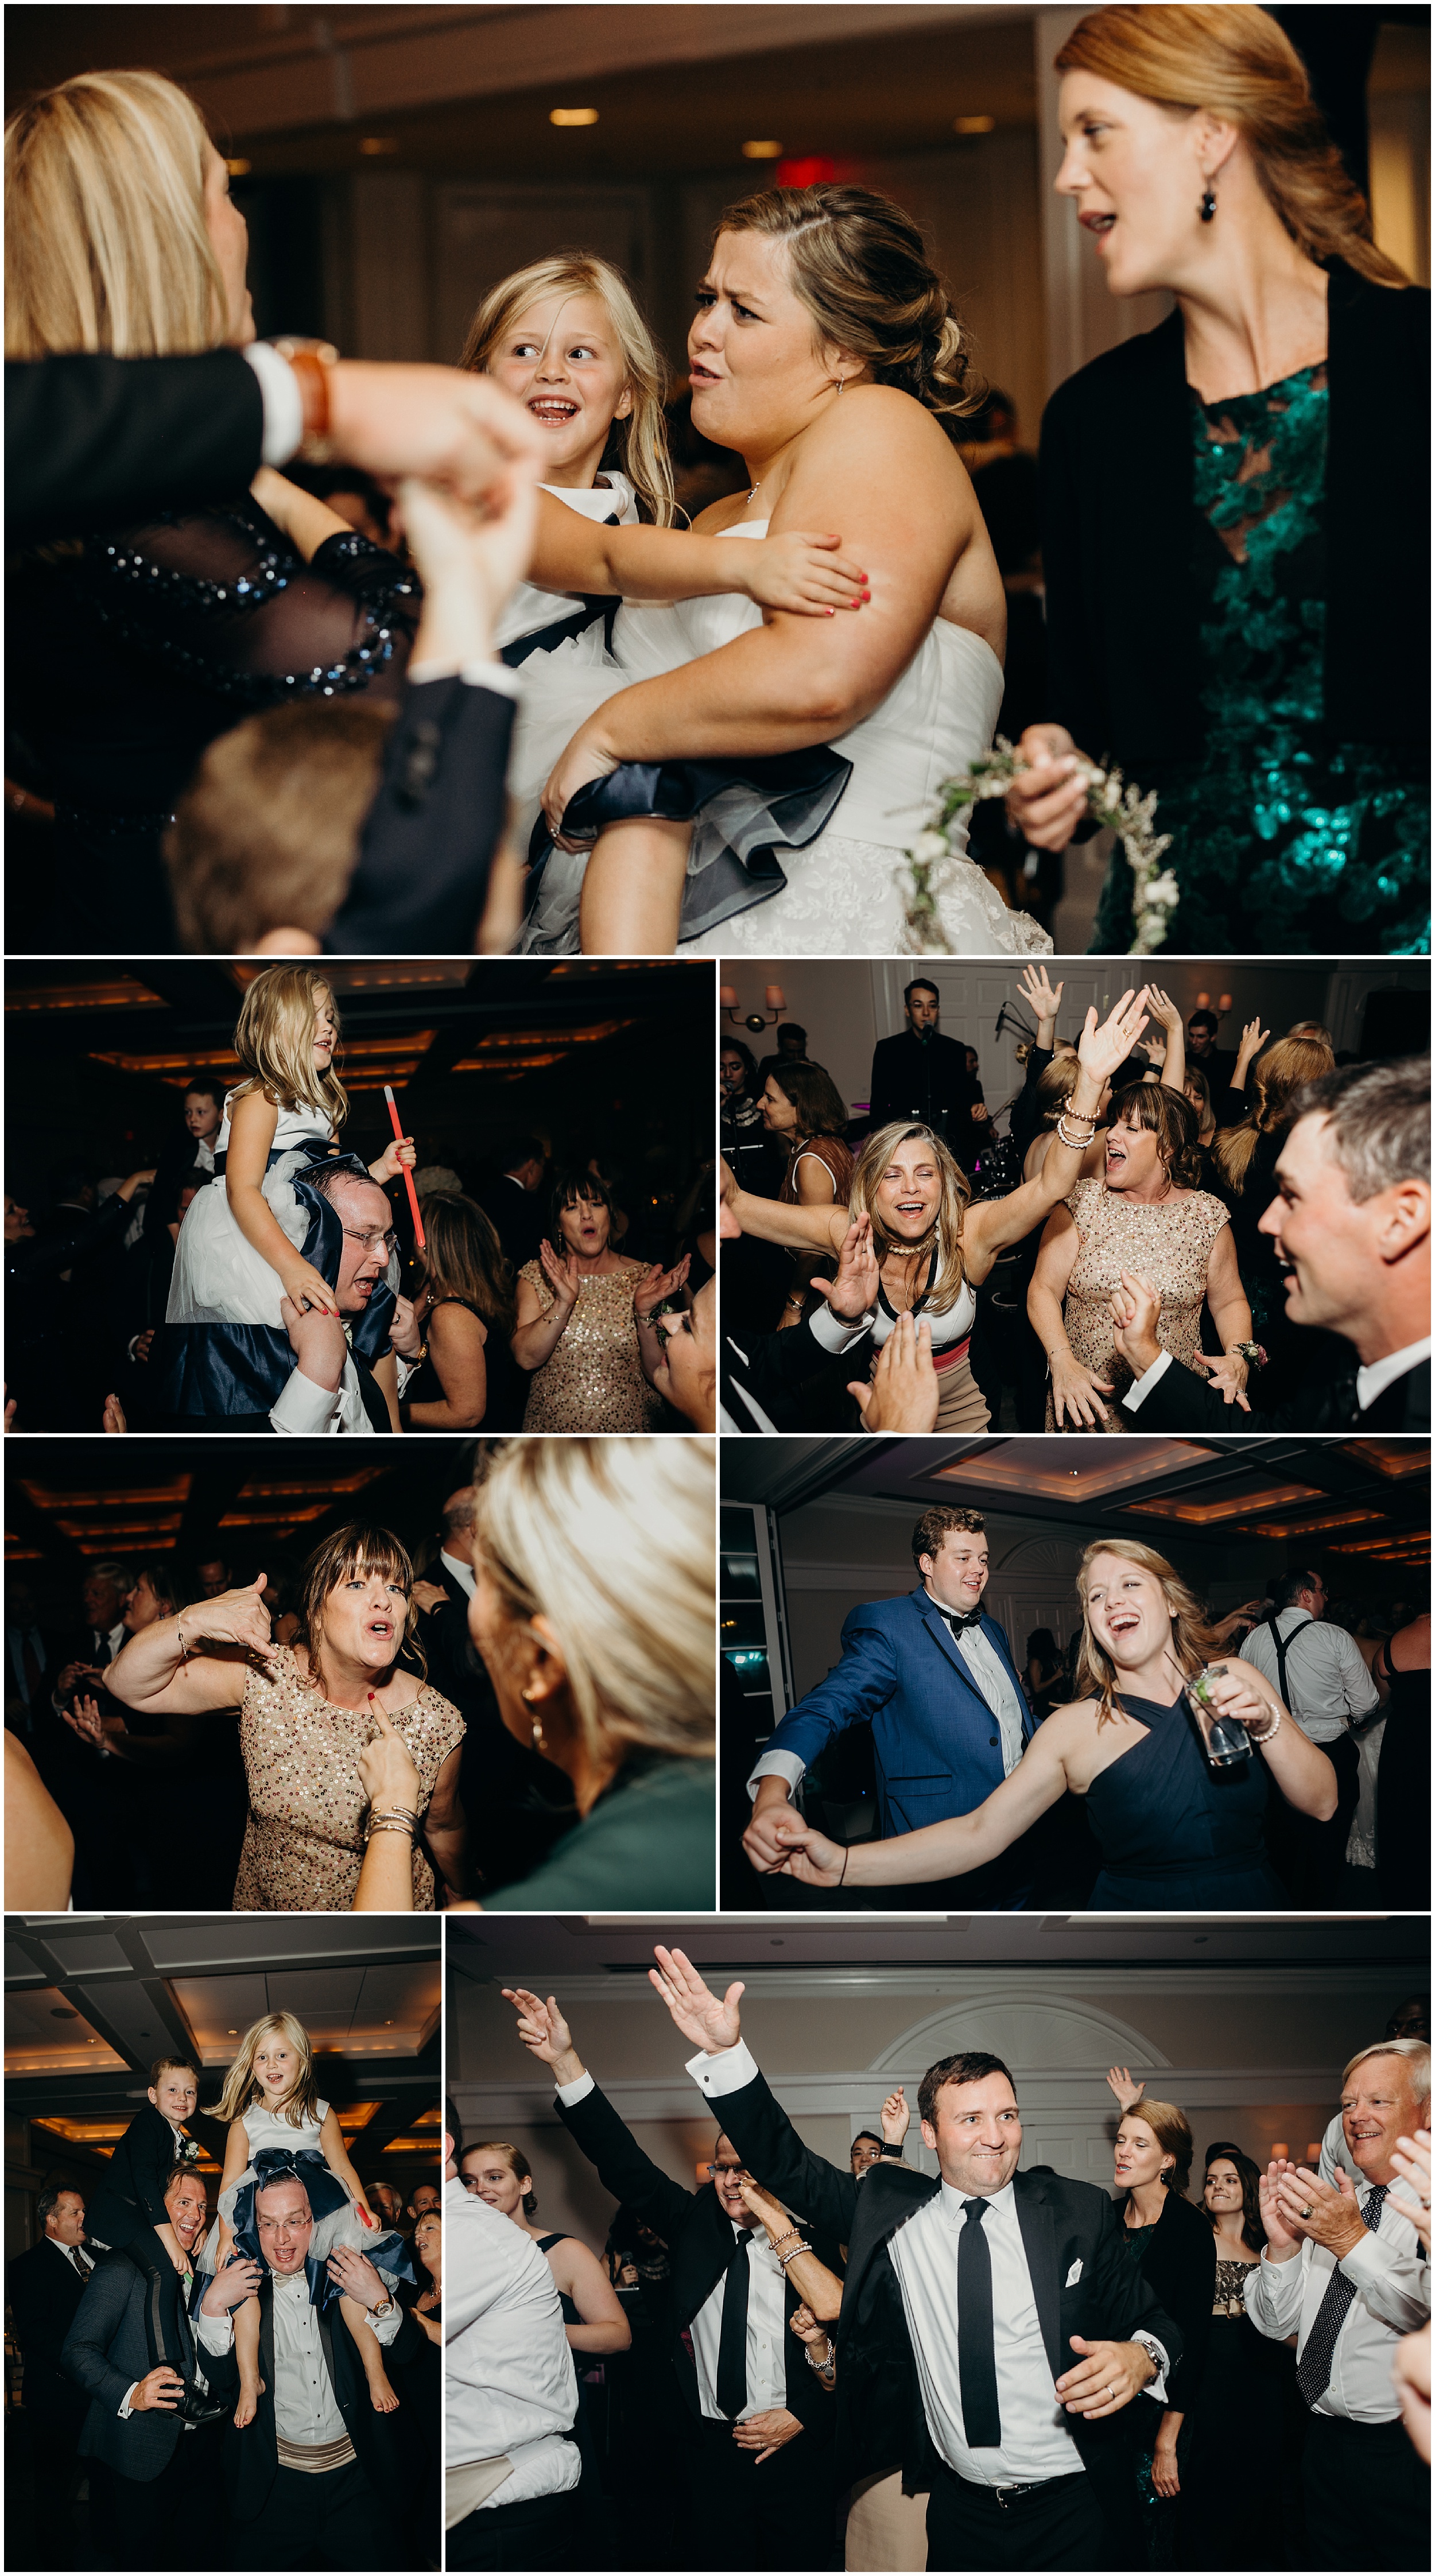 wedding guests on the dance floor at country club of darien in darien, connecticut